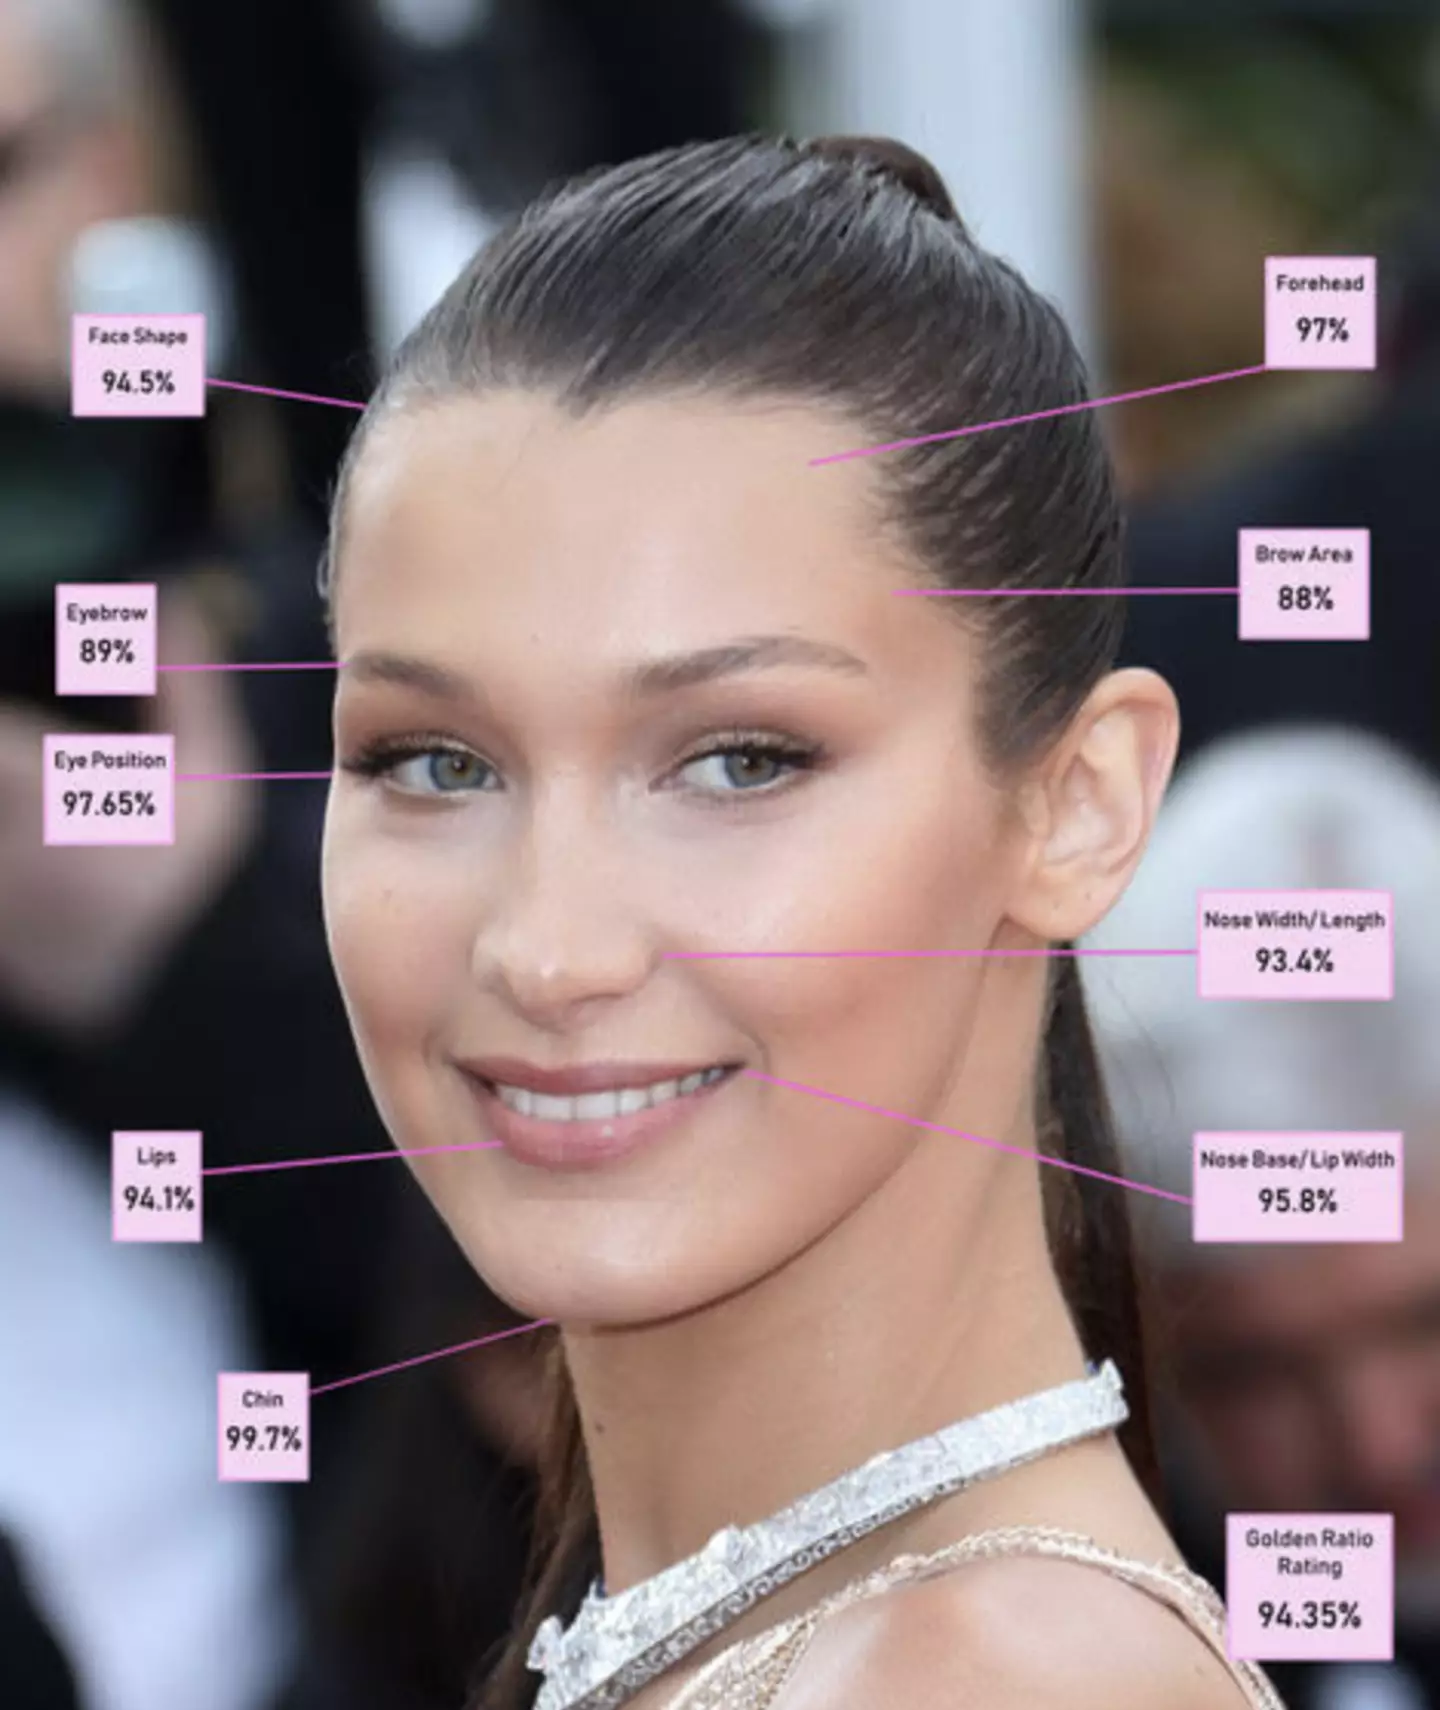 Bella Hadid is, on paper, the third most beautiful woman in the world.